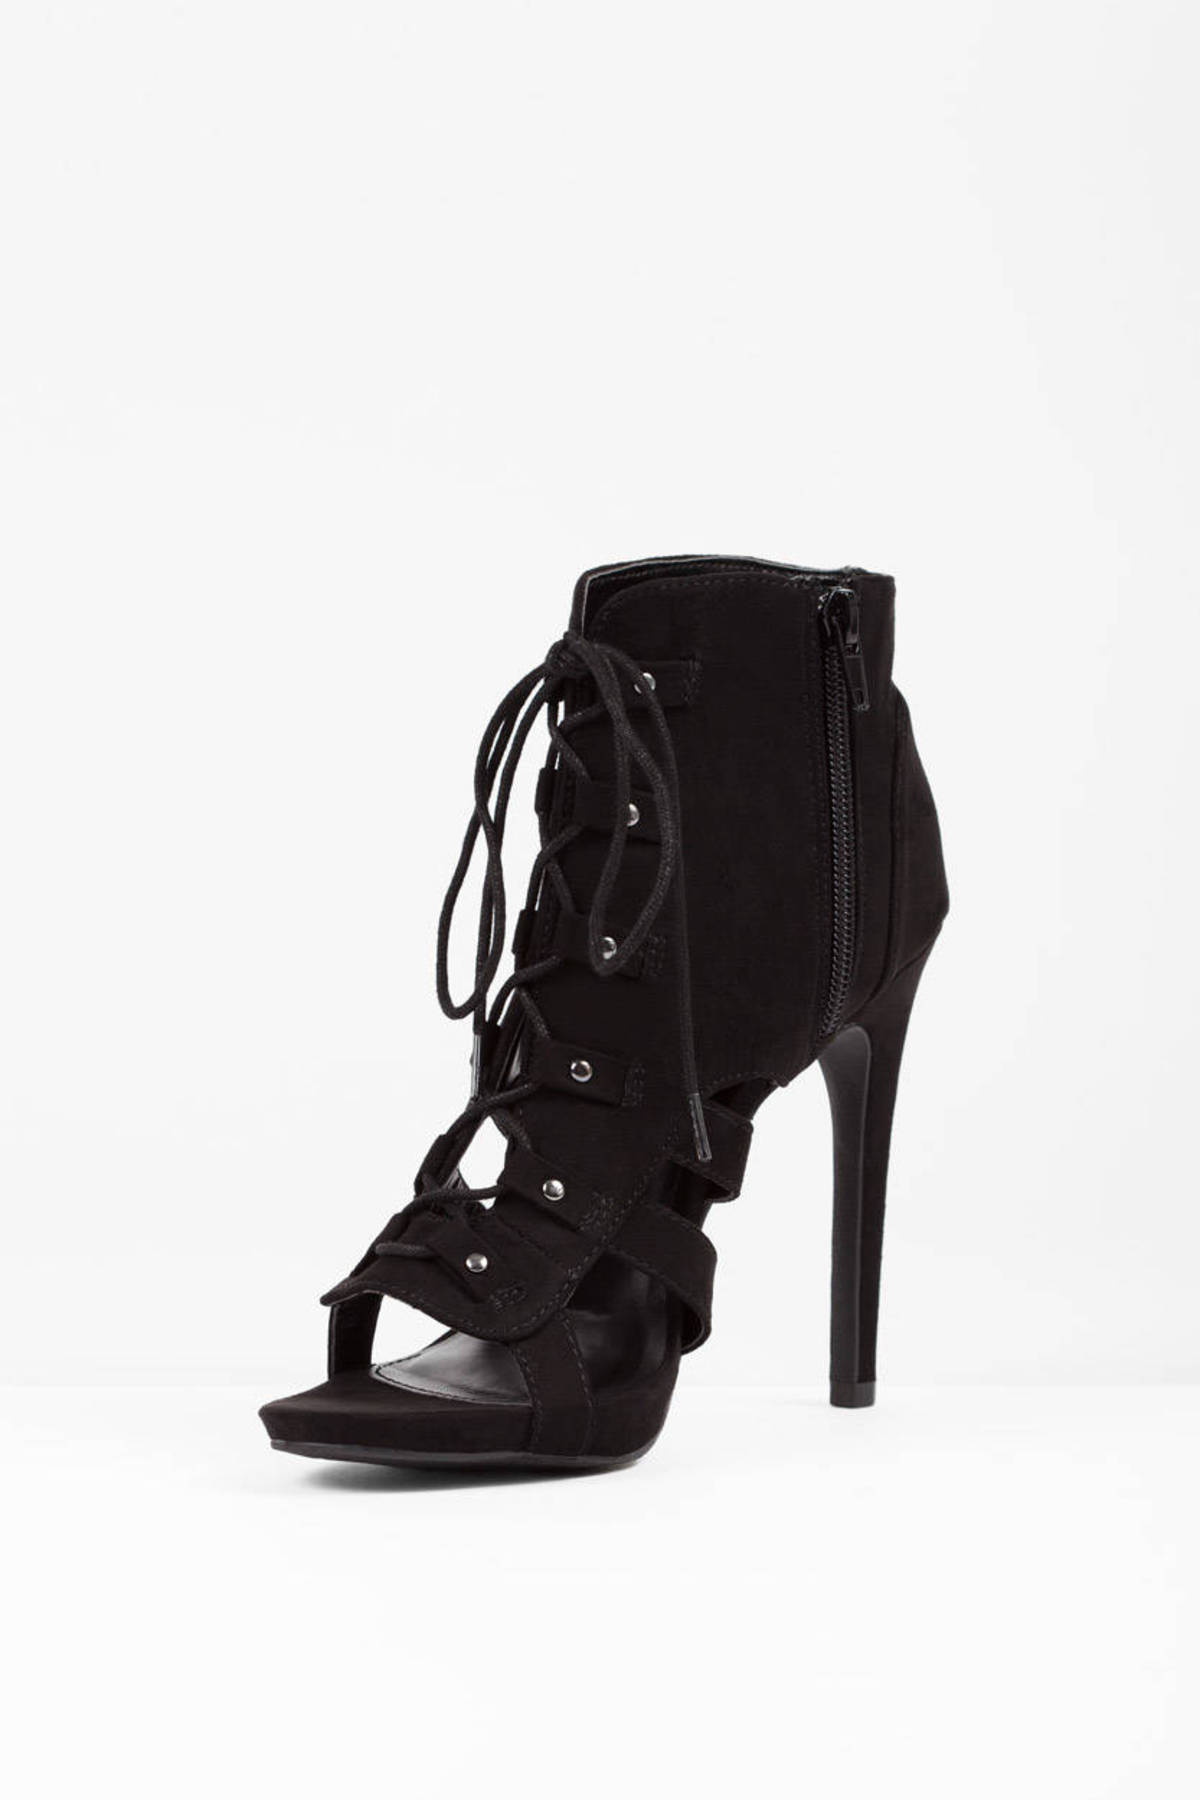 Evelyn Cut Out Booties in Black - $29 | Tobi US